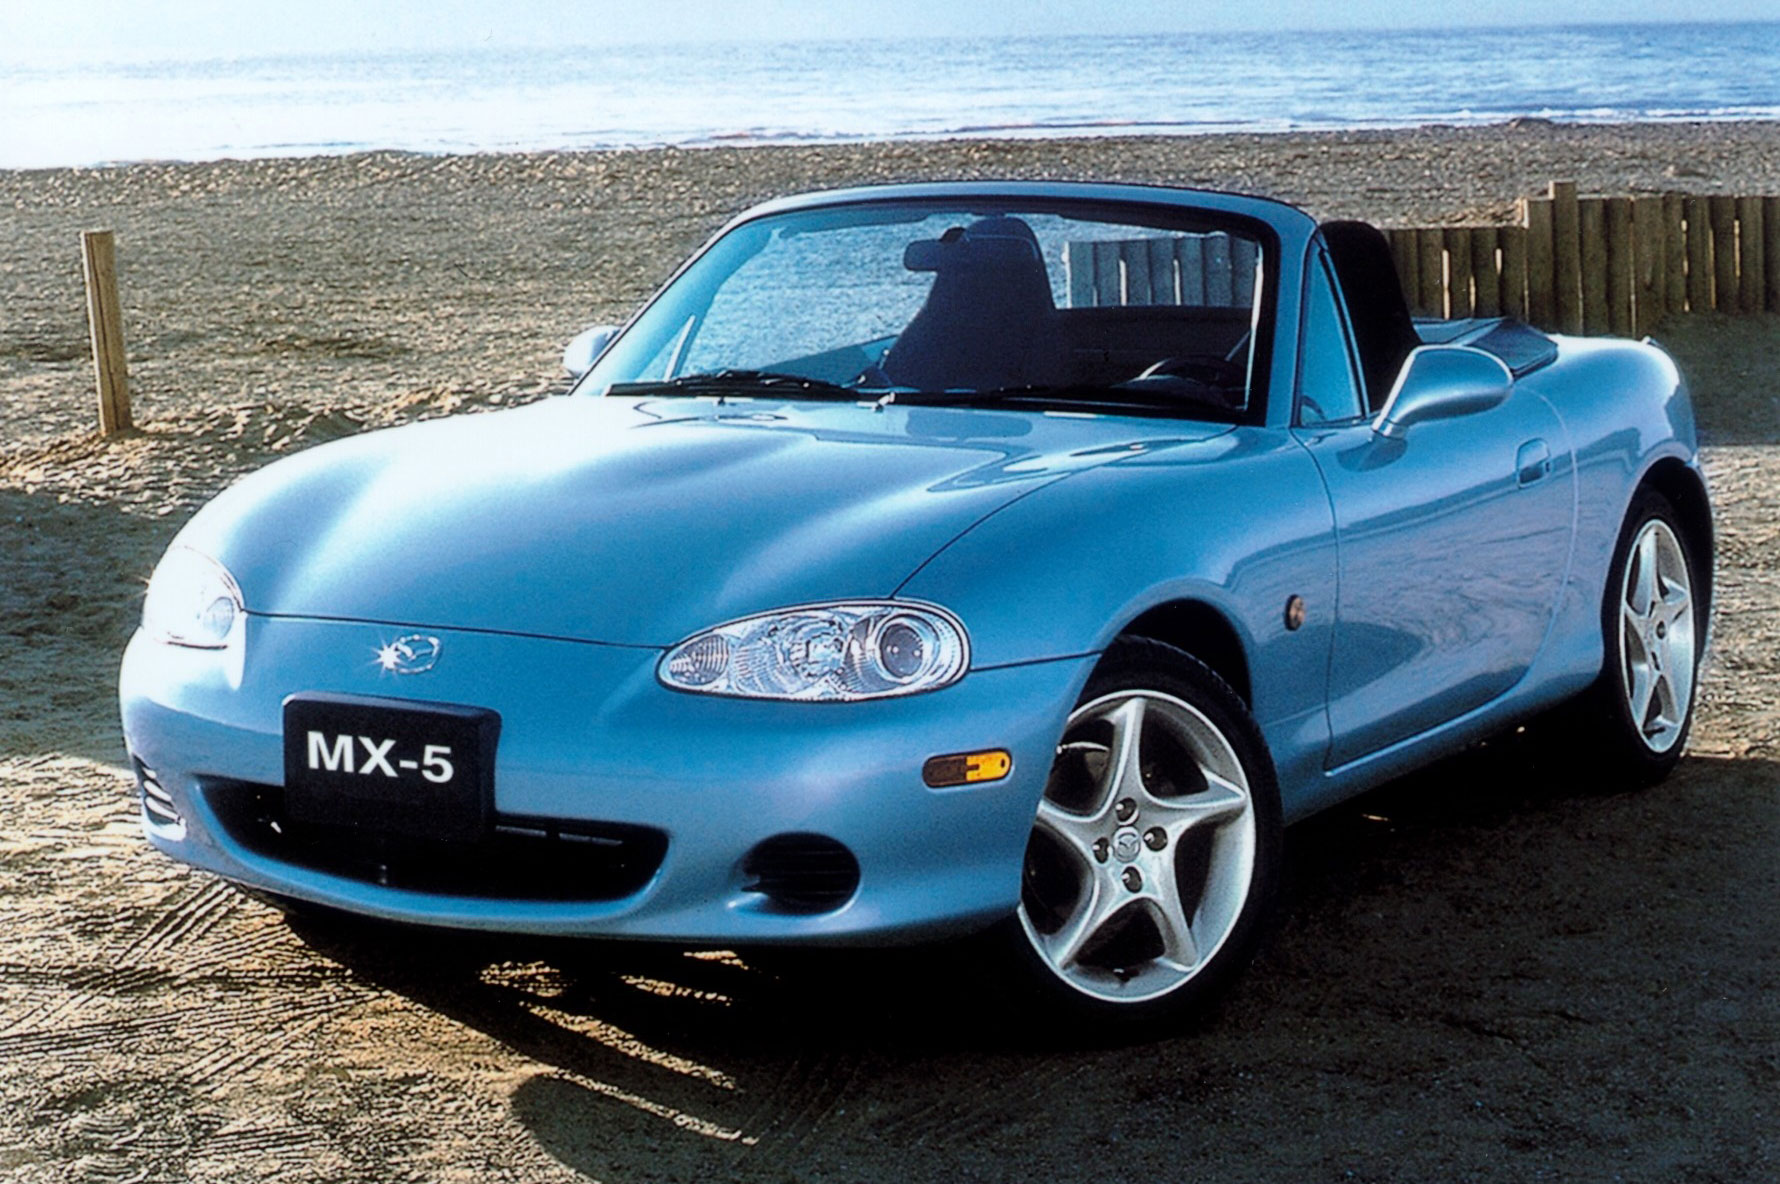 Cars for a grand (£1000 cars for sale) buying guide: 1999 Mazda MX-5